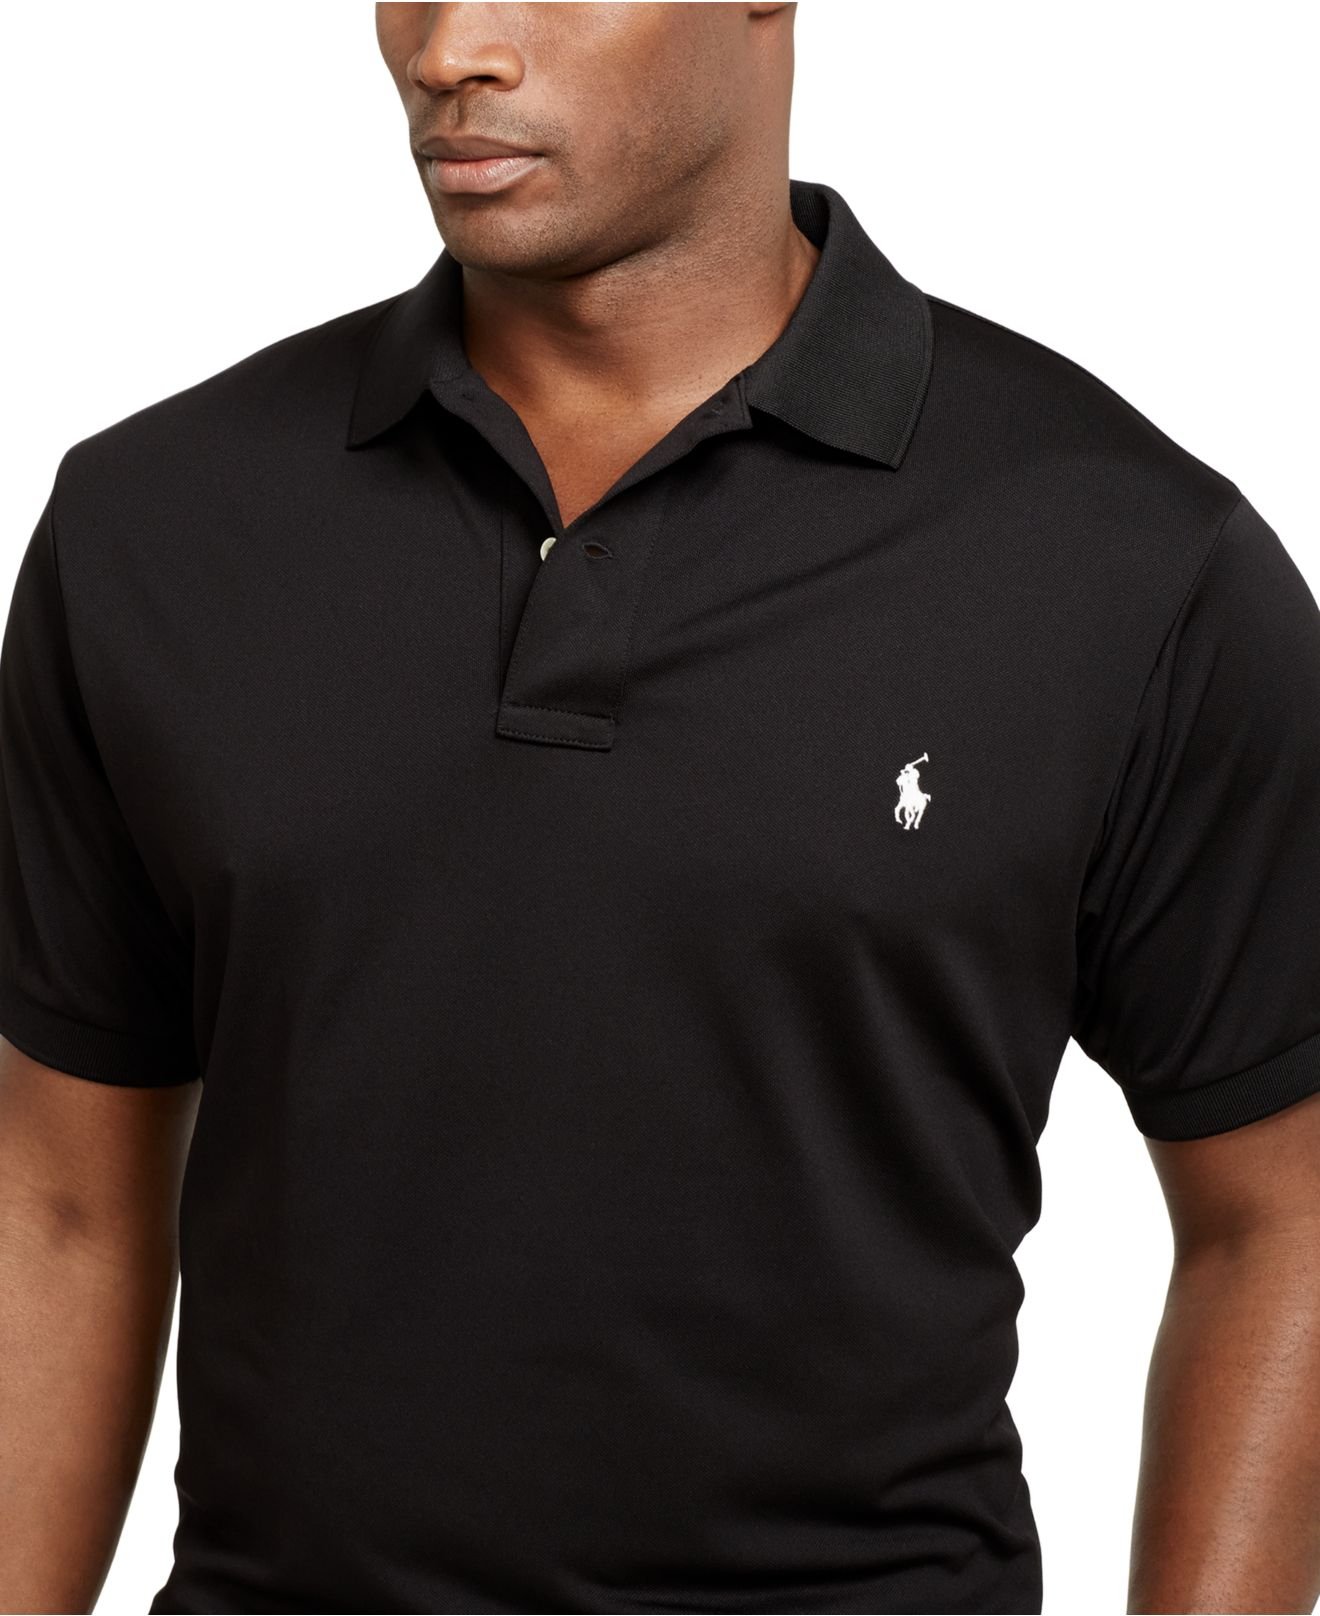 Lyst - Polo Ralph Lauren Big And Tall Performance Mesh Polo Shirt in